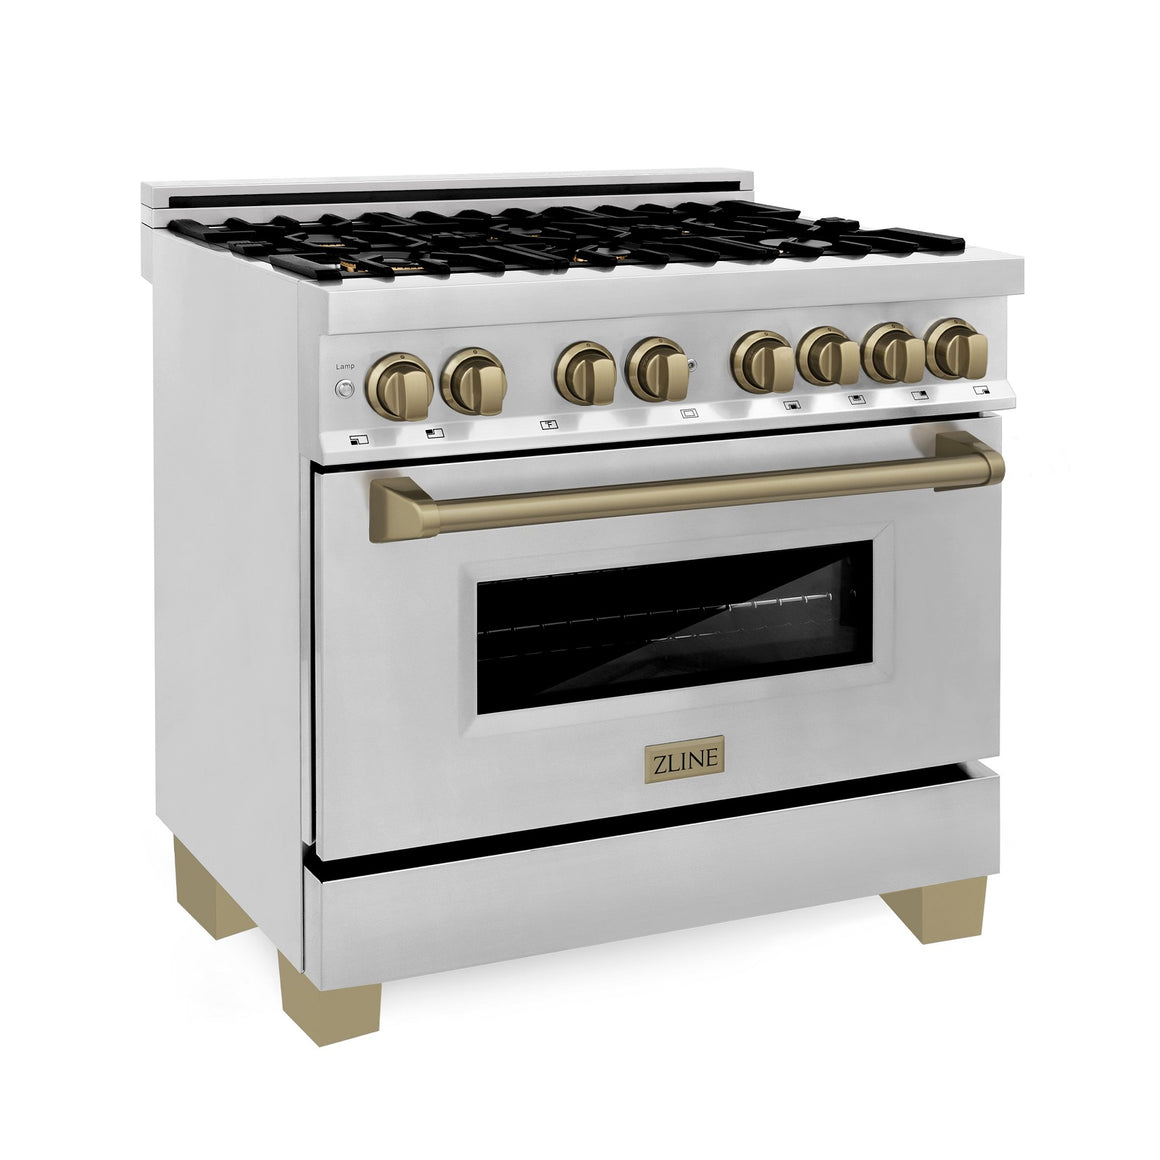 ZLINE Autograph Edition 36" 4.6 cu. ft. Dual Fuel Range with Gas Stove and Electric Oven in Stainless Steel with Champagne Bronze Accents (RAZ-36-CB)